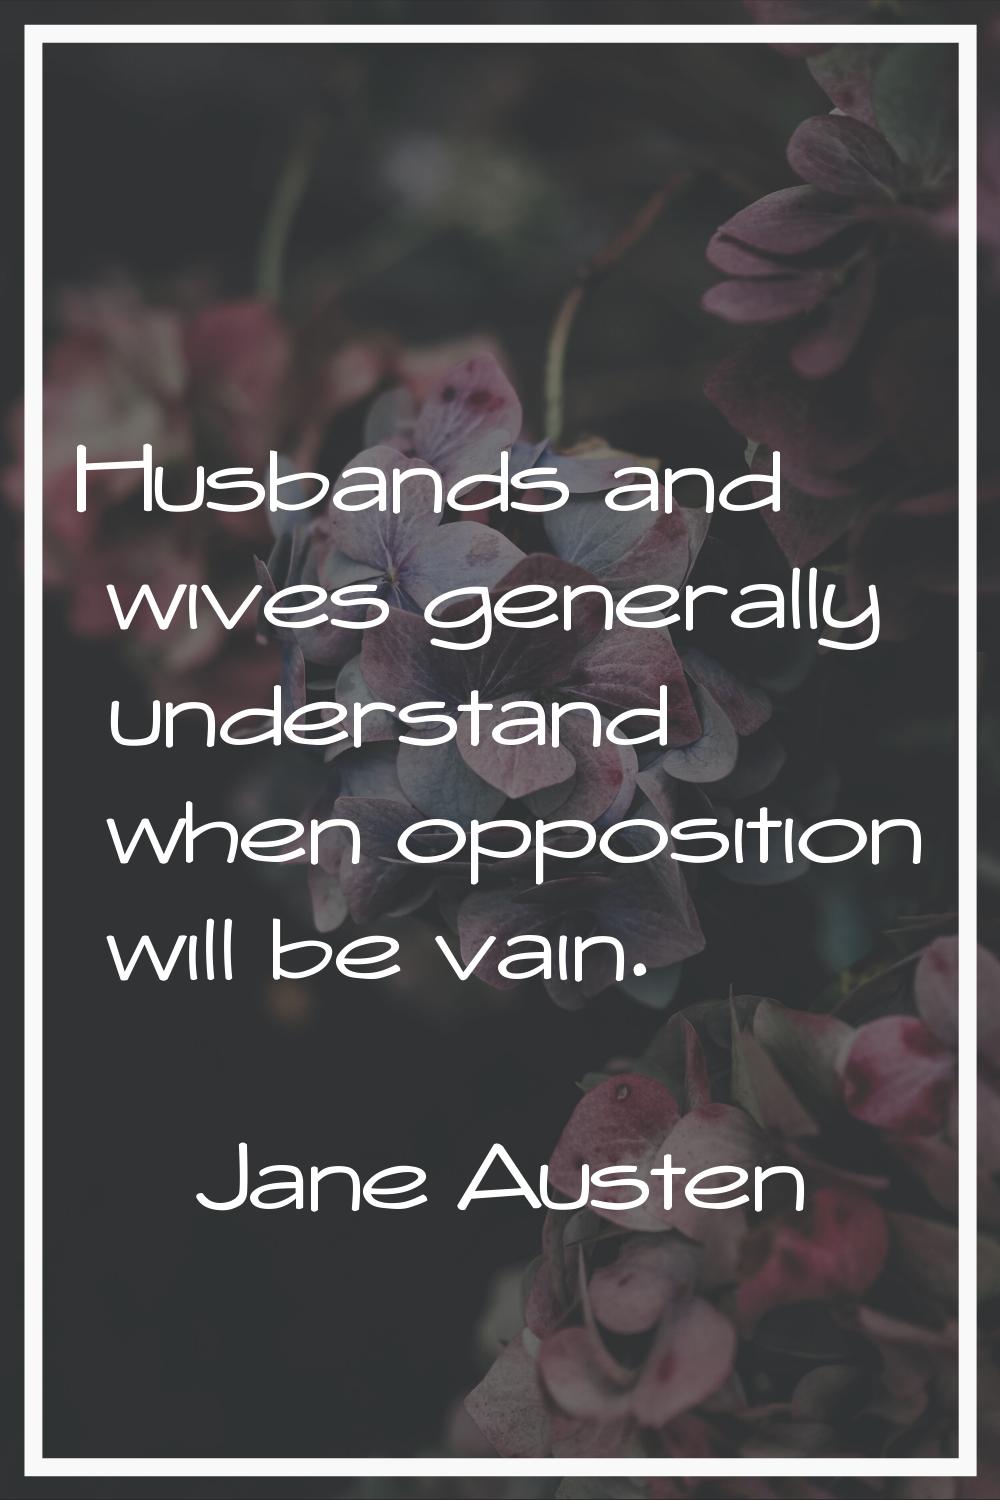 Husbands and wives generally understand when opposition will be vain.